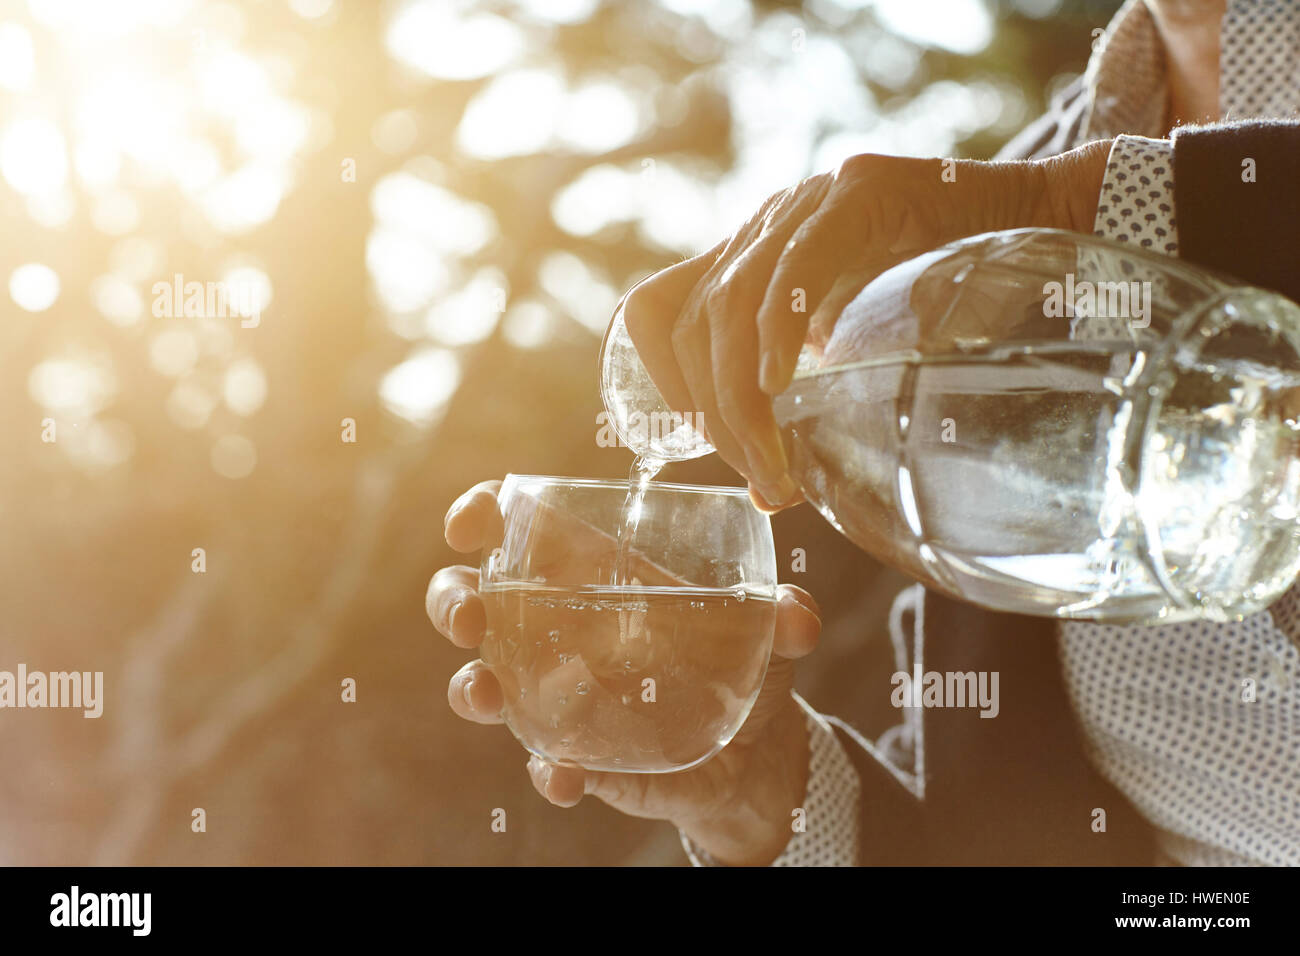 Hands of senior woman pouring glass of water by window Stock Photo